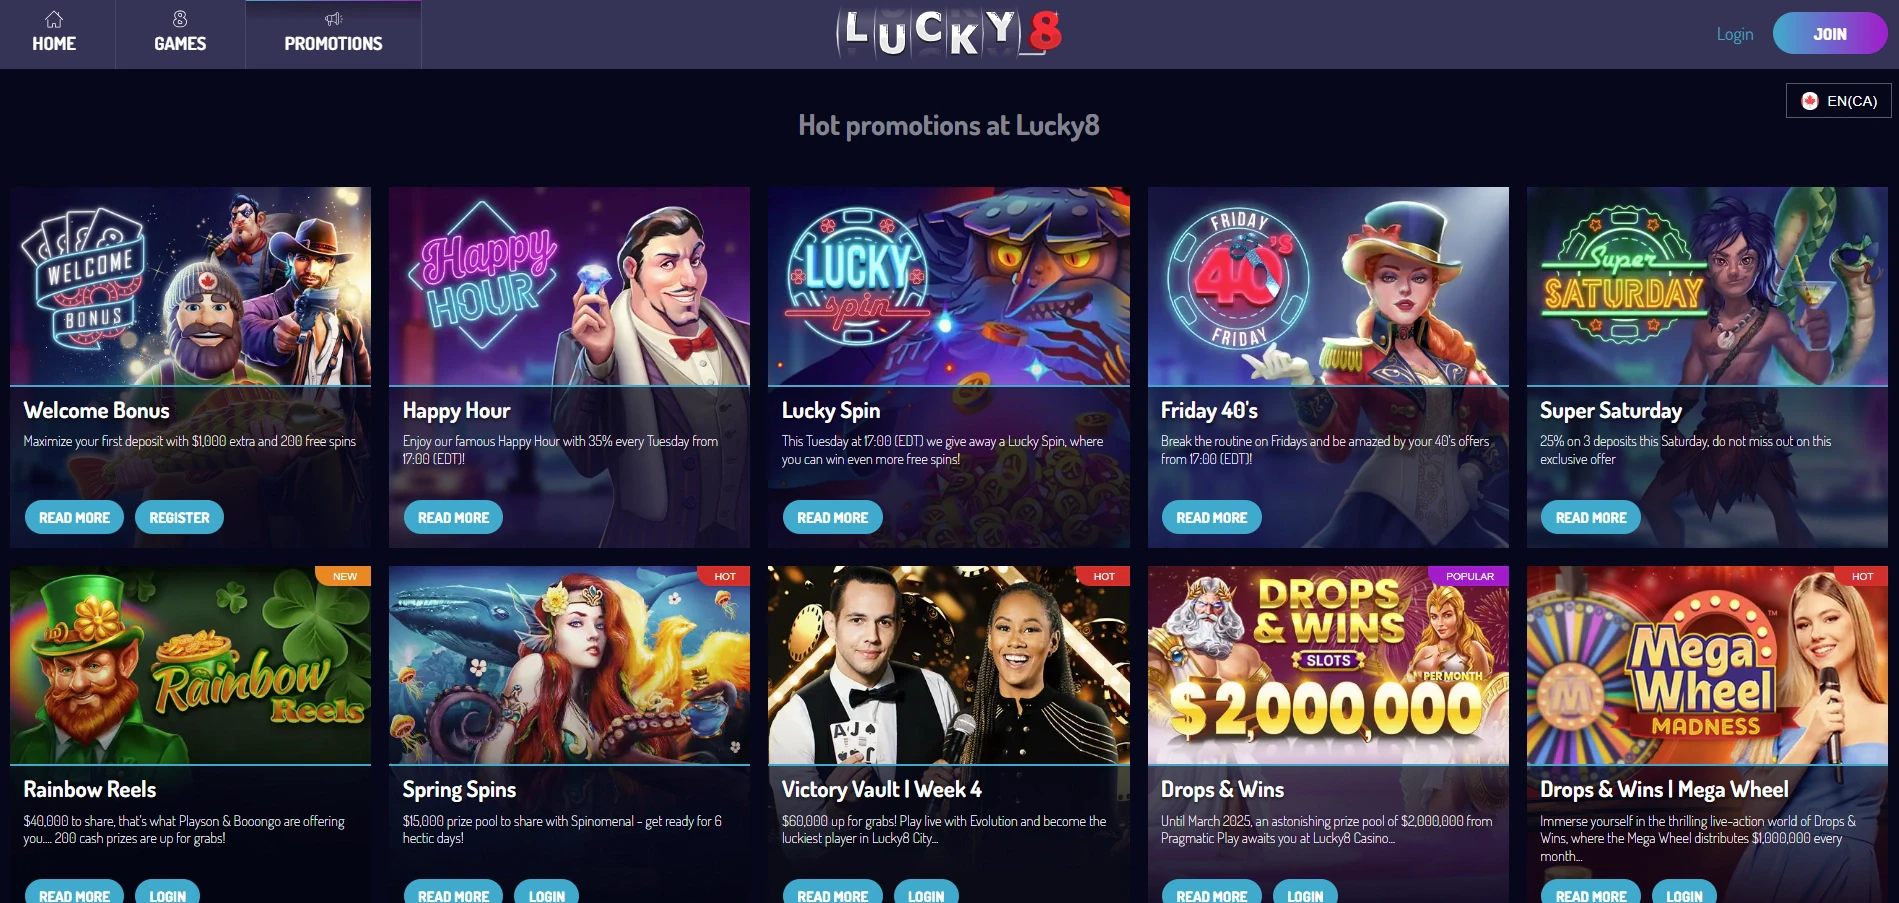 Lucky8 Promotions